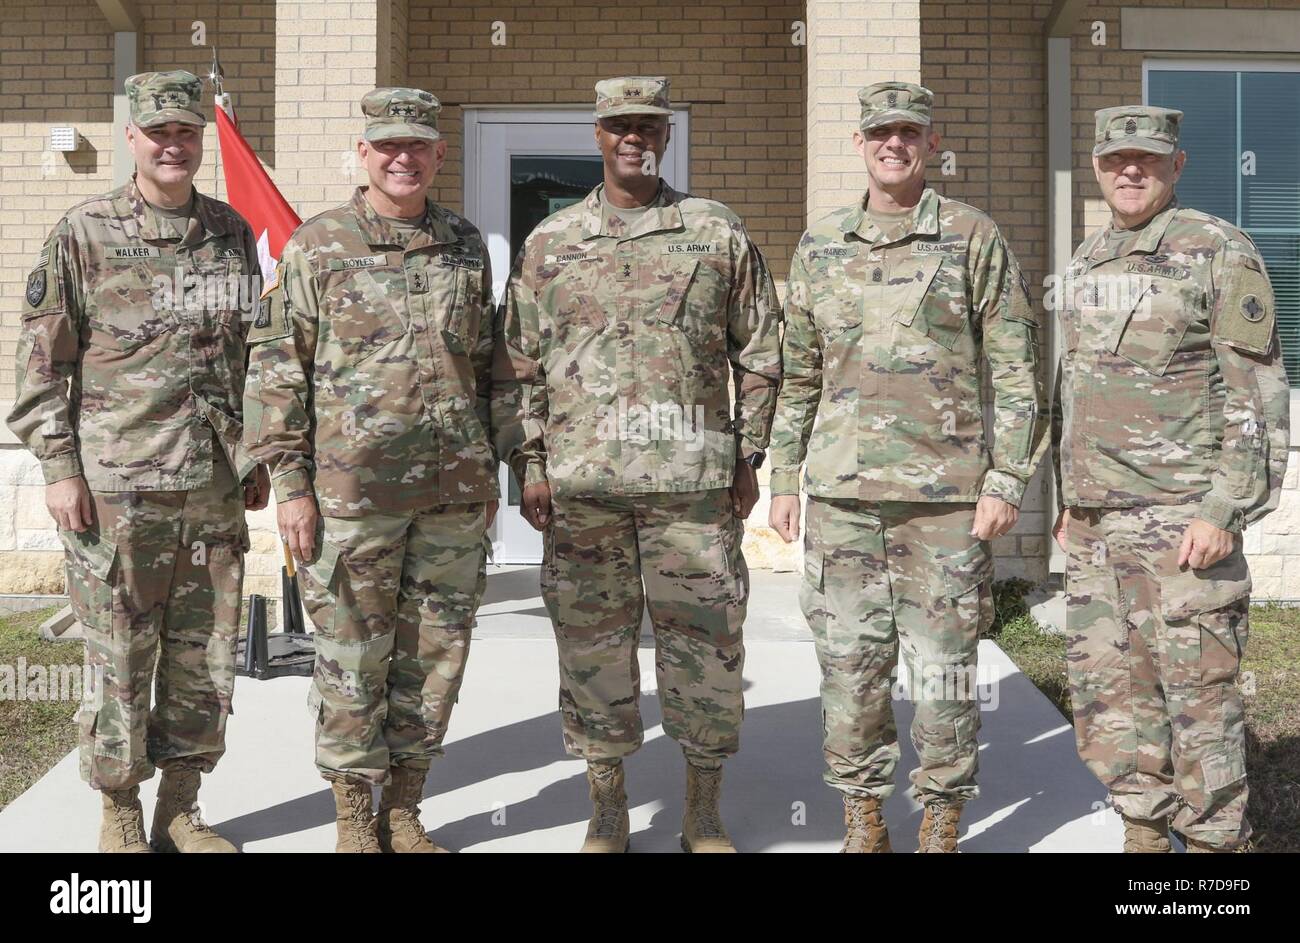 Brig. Gen. Clint E. Walker, commander of the 184th Sustainment Command, Mississippi Army National Guard,  Maj. Gen. Janson D. Boyles, the adjutant general of  Mississippi, Maj. Gen. Slyvester Cannon,  assistant adjutant General of Alabama, Command Sgt. Maj. John T. Raines, senior enlisted advisor of the Mississippi National Guard , and  Command Sgt. Maj. Jason Little Sr, senior enlisted advisor of the 184th Sustianment Command, gathers during a visit to Fort Hood before the 184th SC deploys to Kuwait later this year. Stock Photo